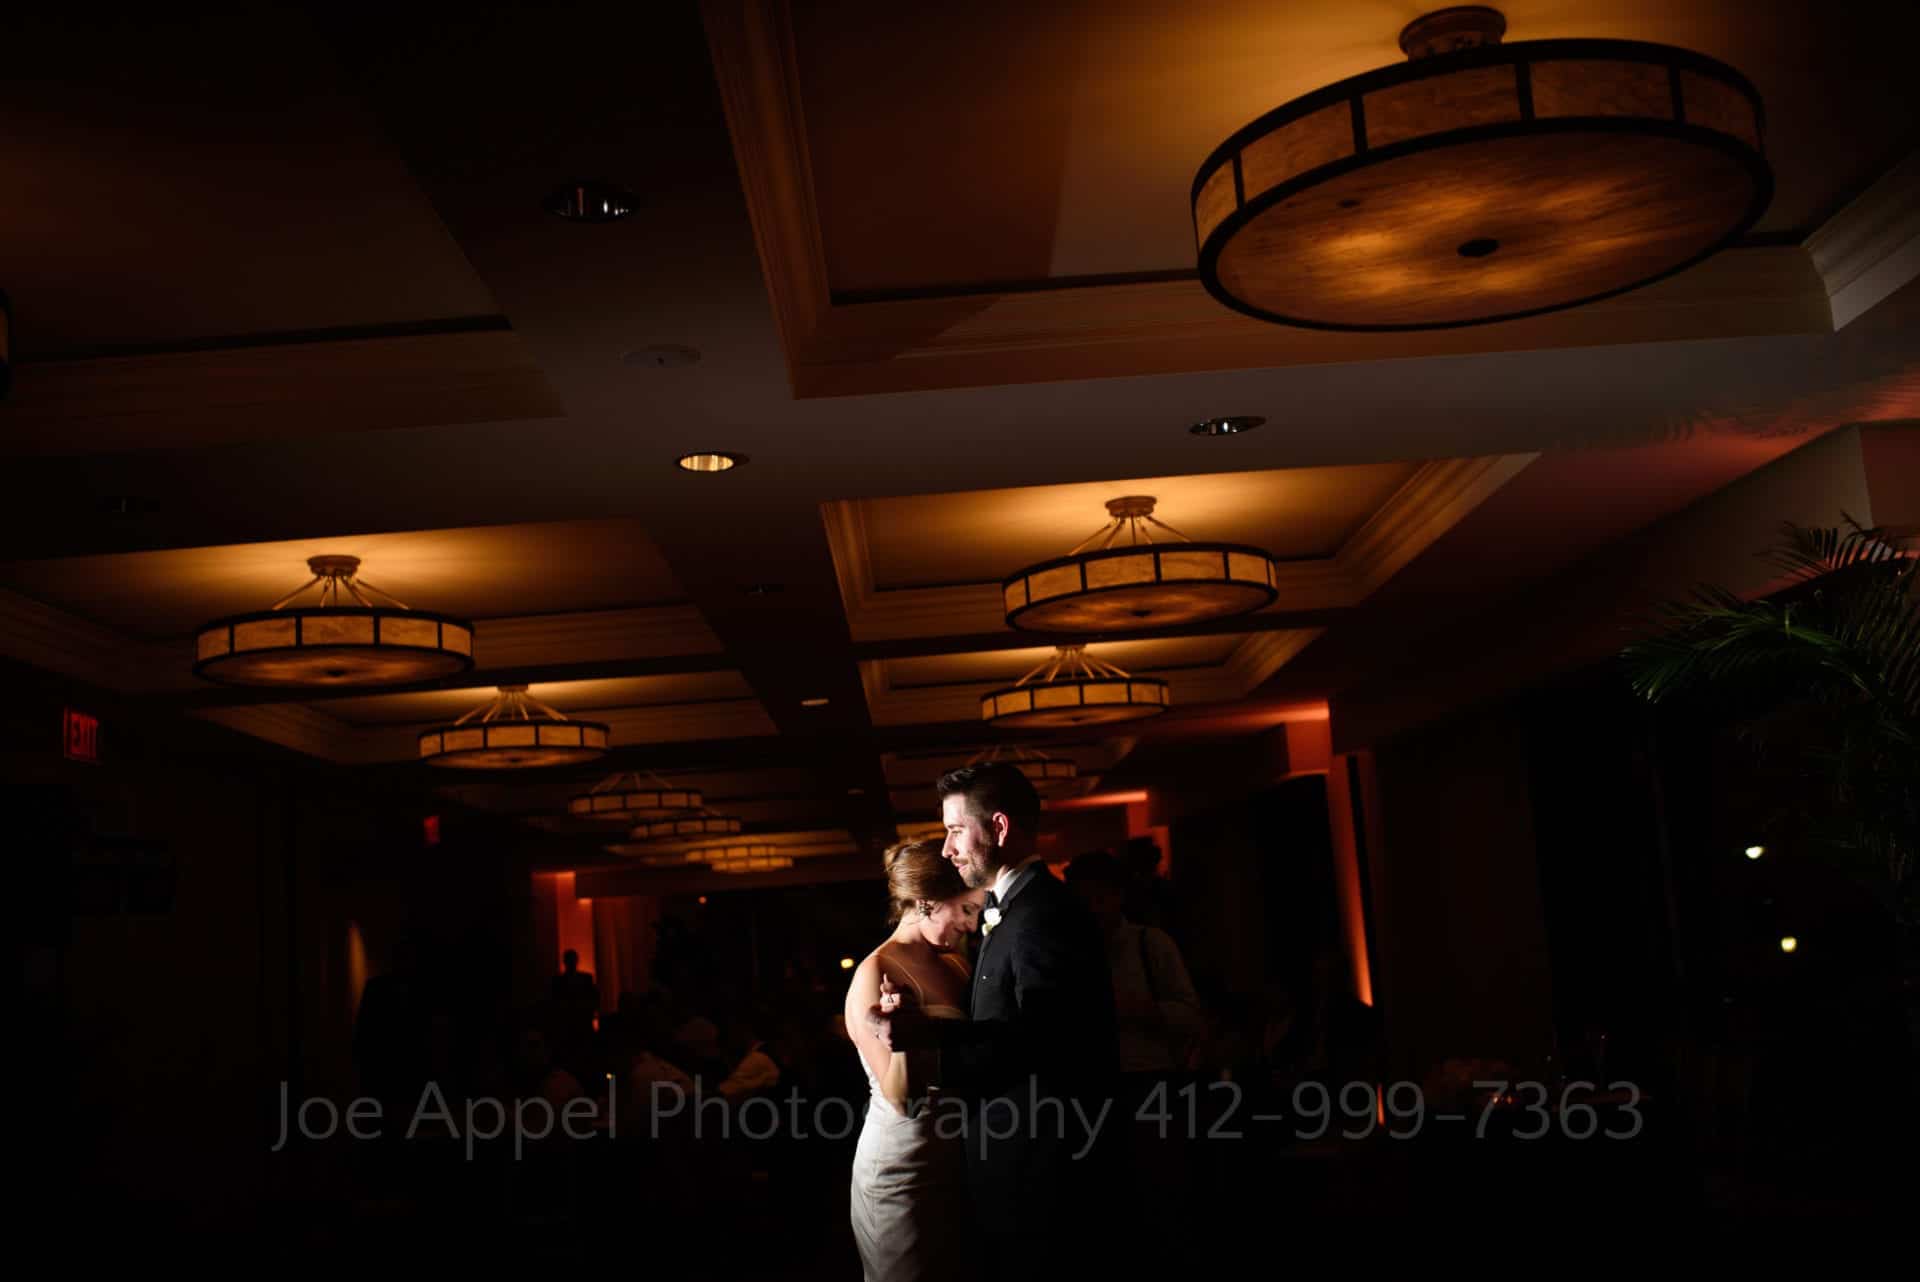 A spotlight in a dark room illuminates a bride and groom as they share their first dance.